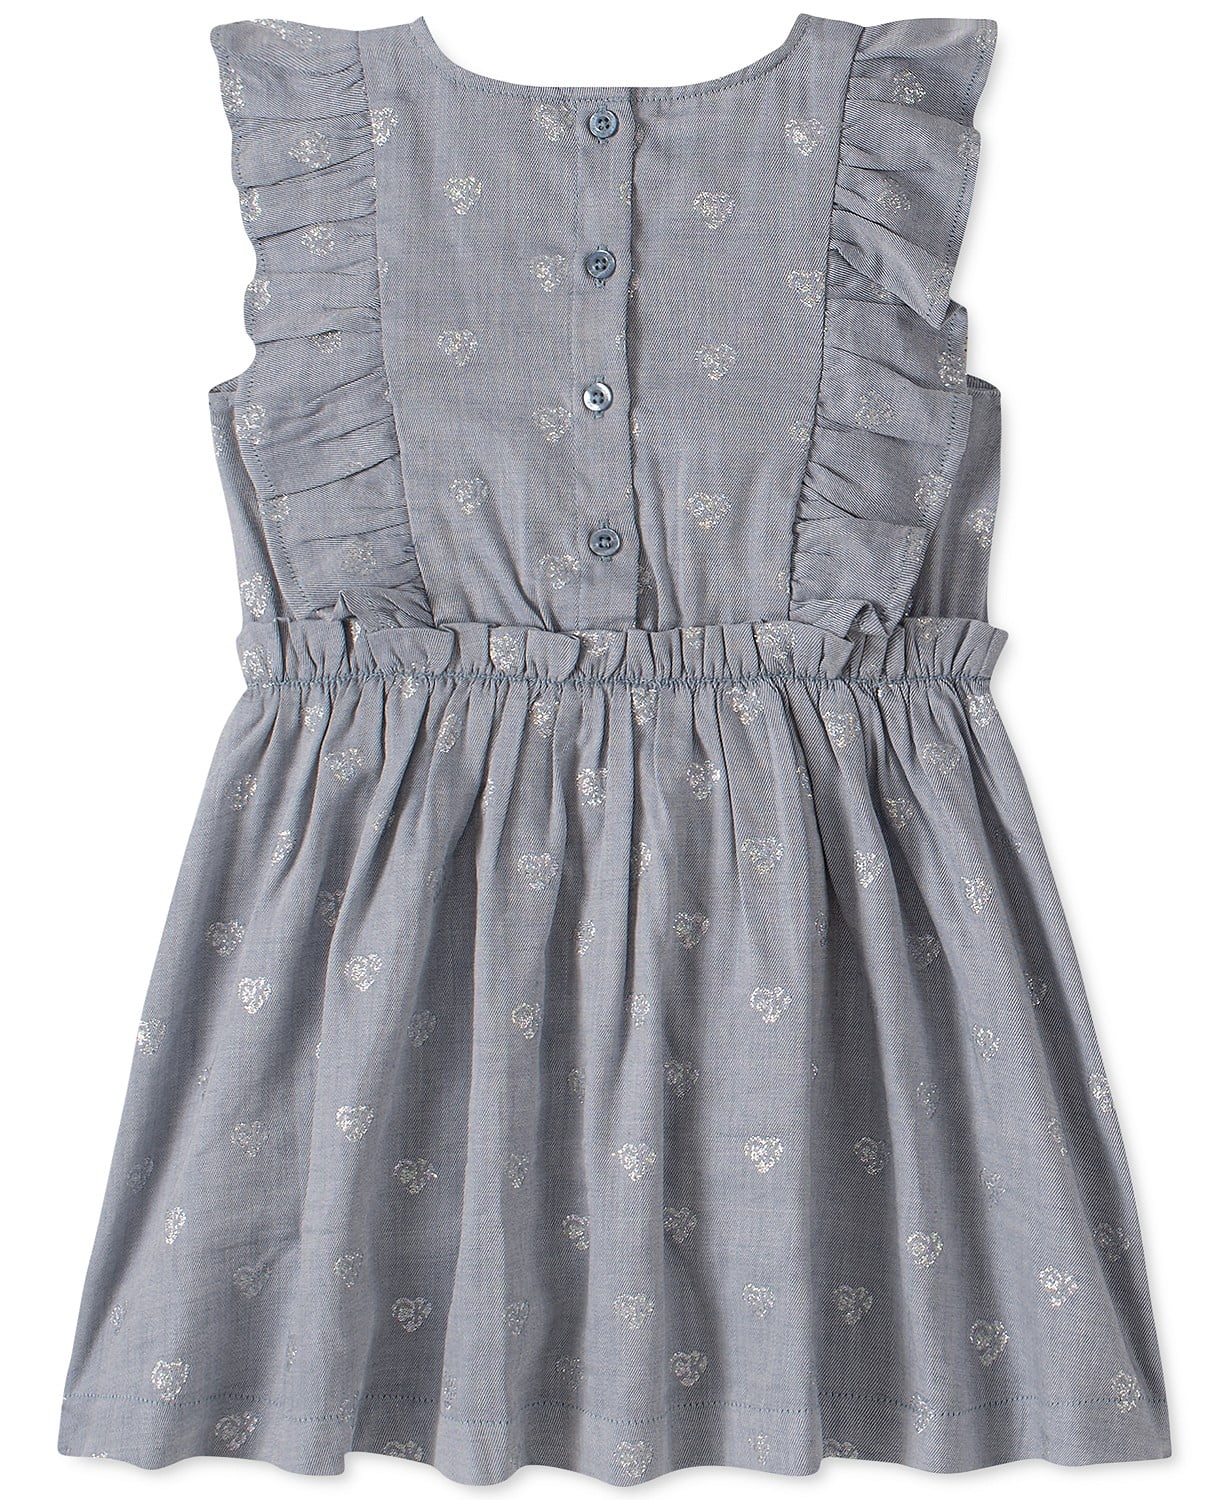 Calvin Klein Girl's Dress Blue Chambray with Hearts 